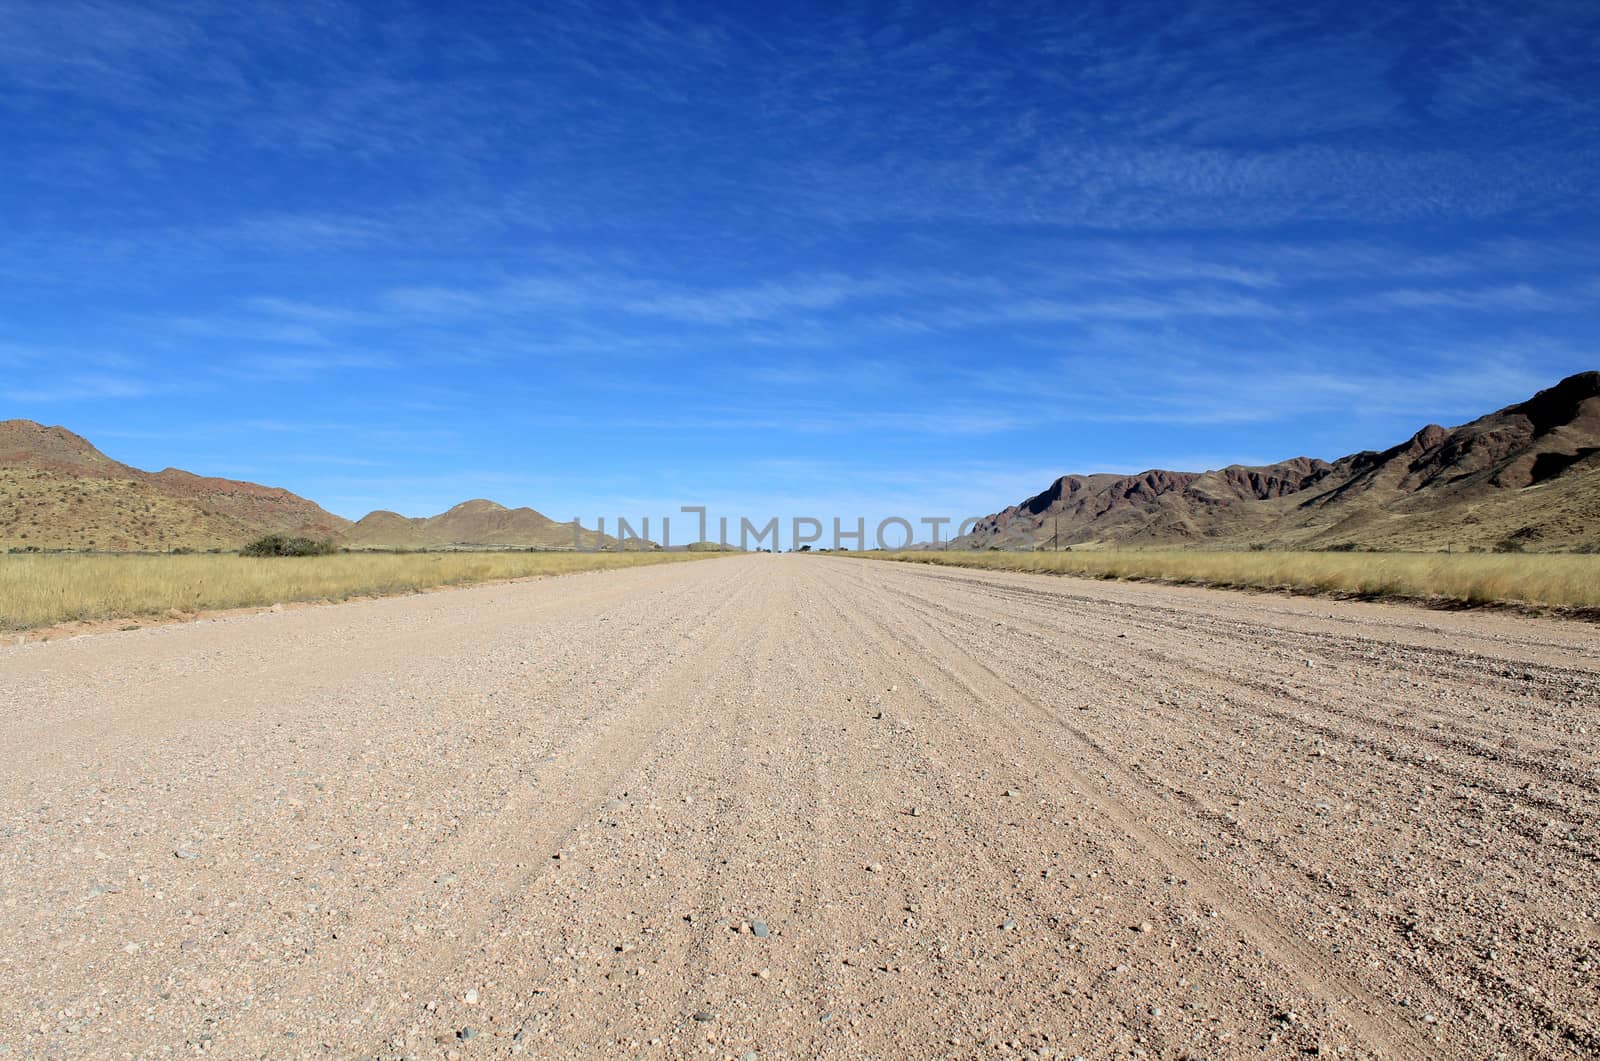 Grassy Savannah with mountains in background, Namib desert road  by ptxgarfield